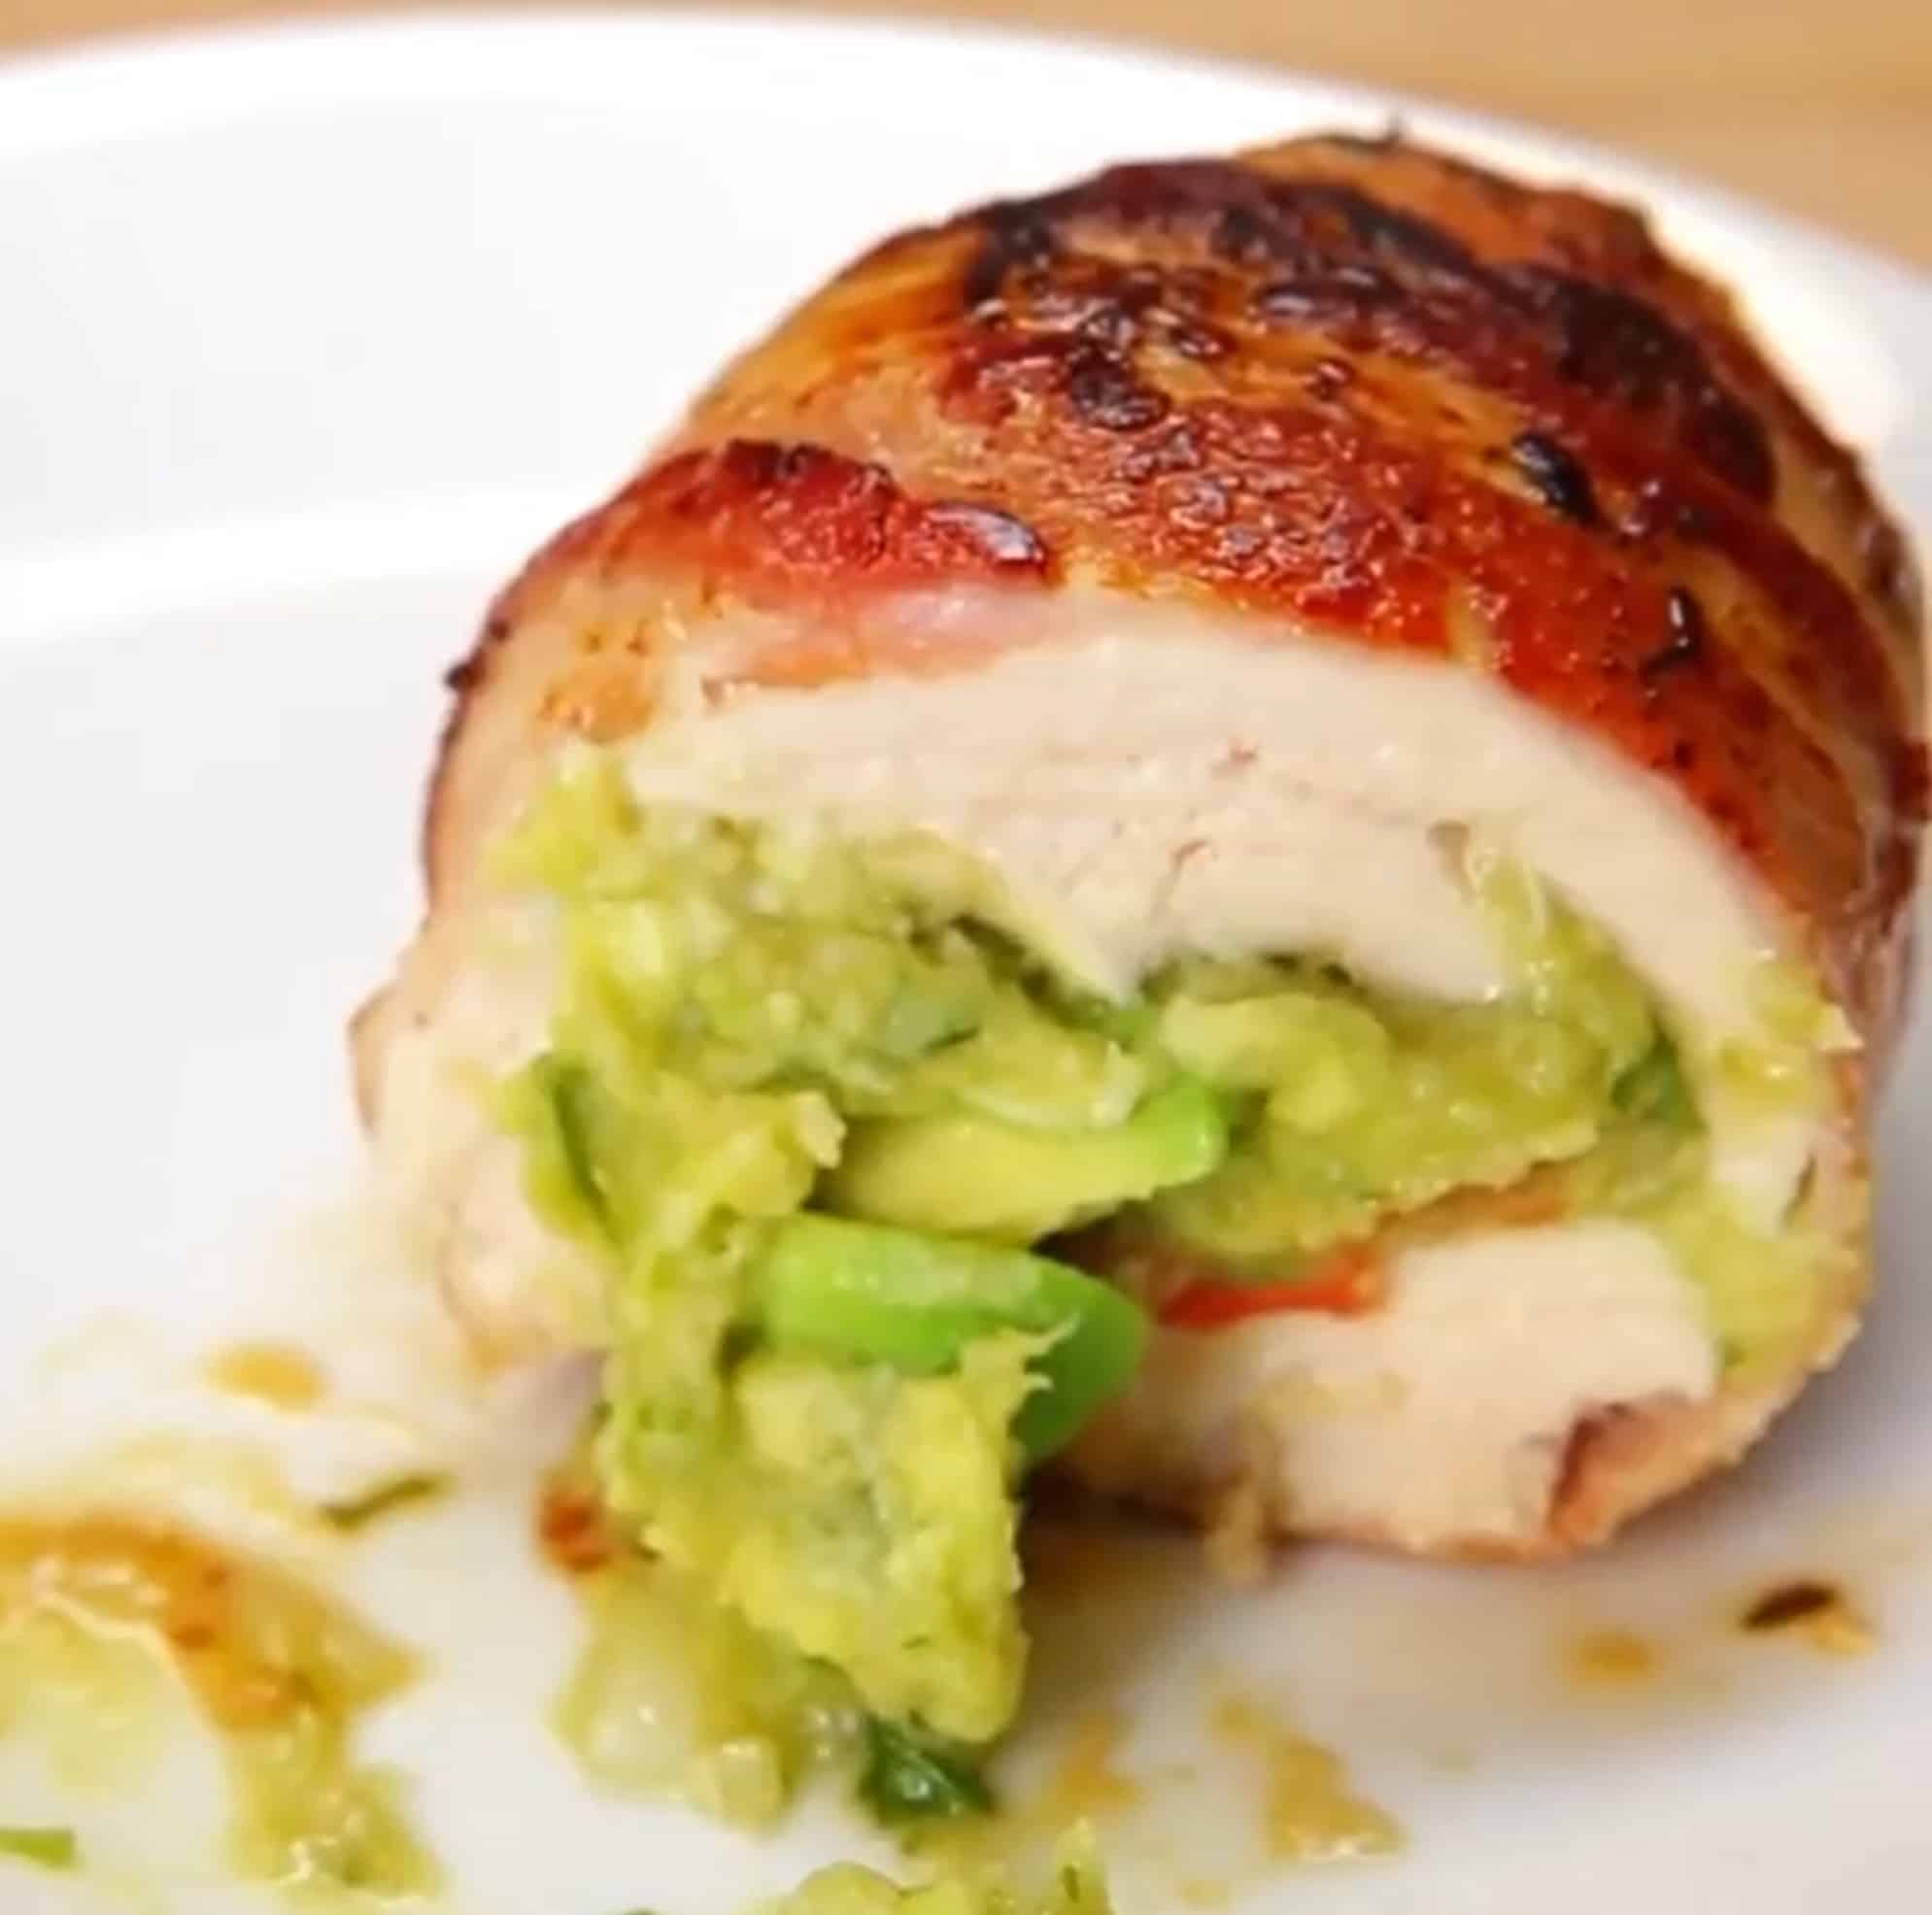 avocado stuffed chicken bacon wrapped recipe. You can learn lots of meals and how to eat healthy and lose weight from the 21 day weight loss program.